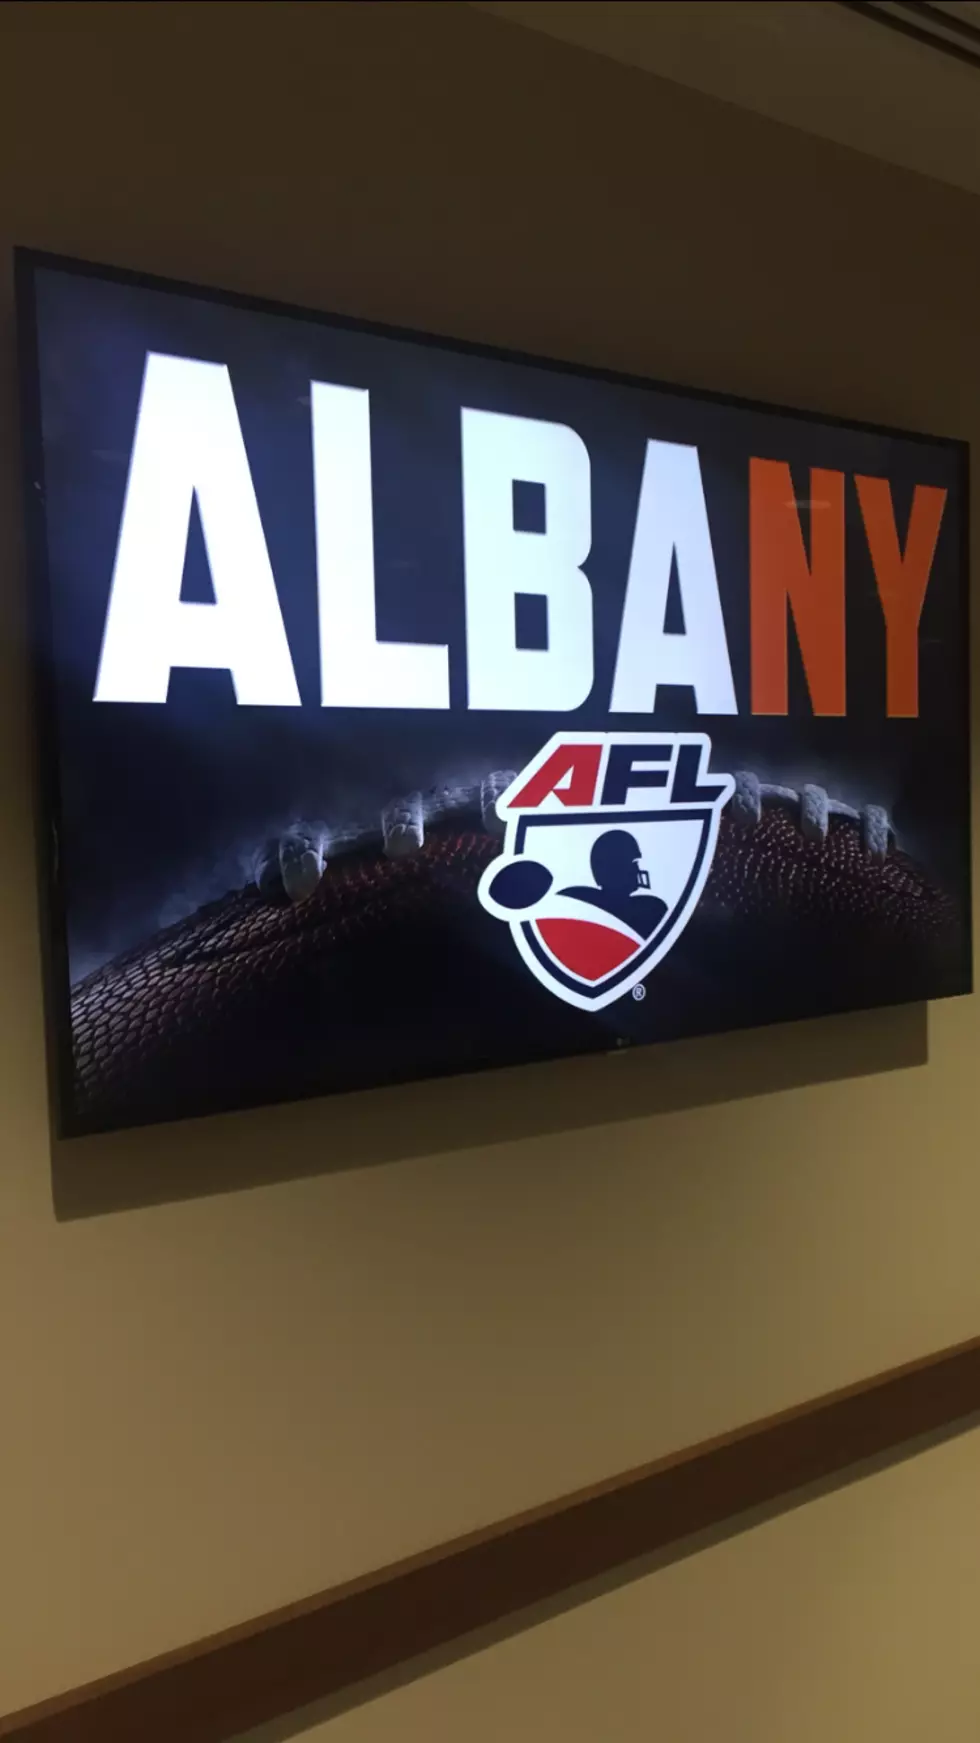 Albany Arena Football Team Name To Be Determined By Fans